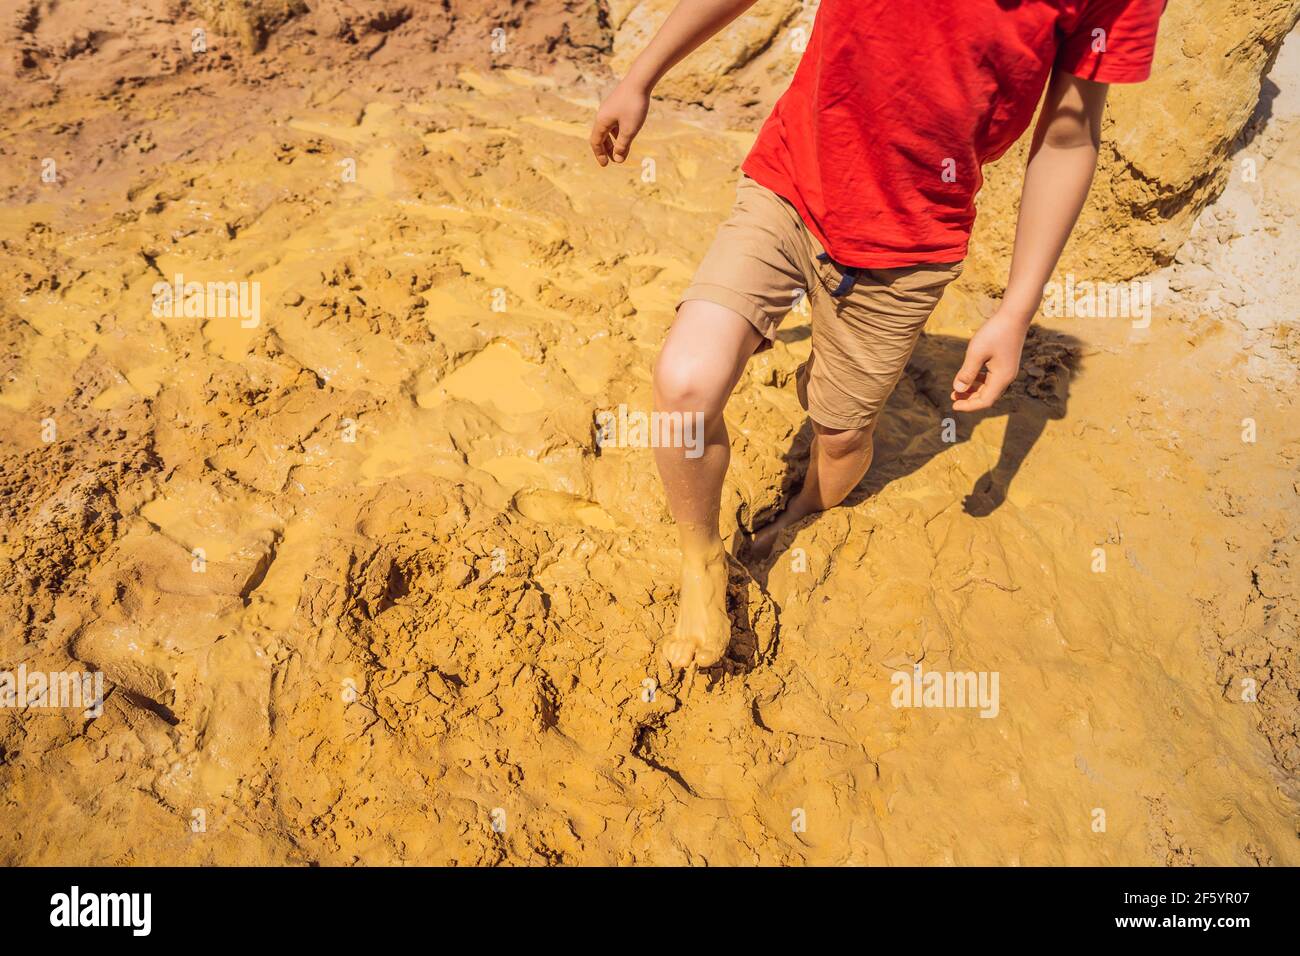 Unlucky person standing in natural quicksand river, clay sediments, sinking, drowning quick sand, stuck in the soil, trapped and stuck concept Stock Photo